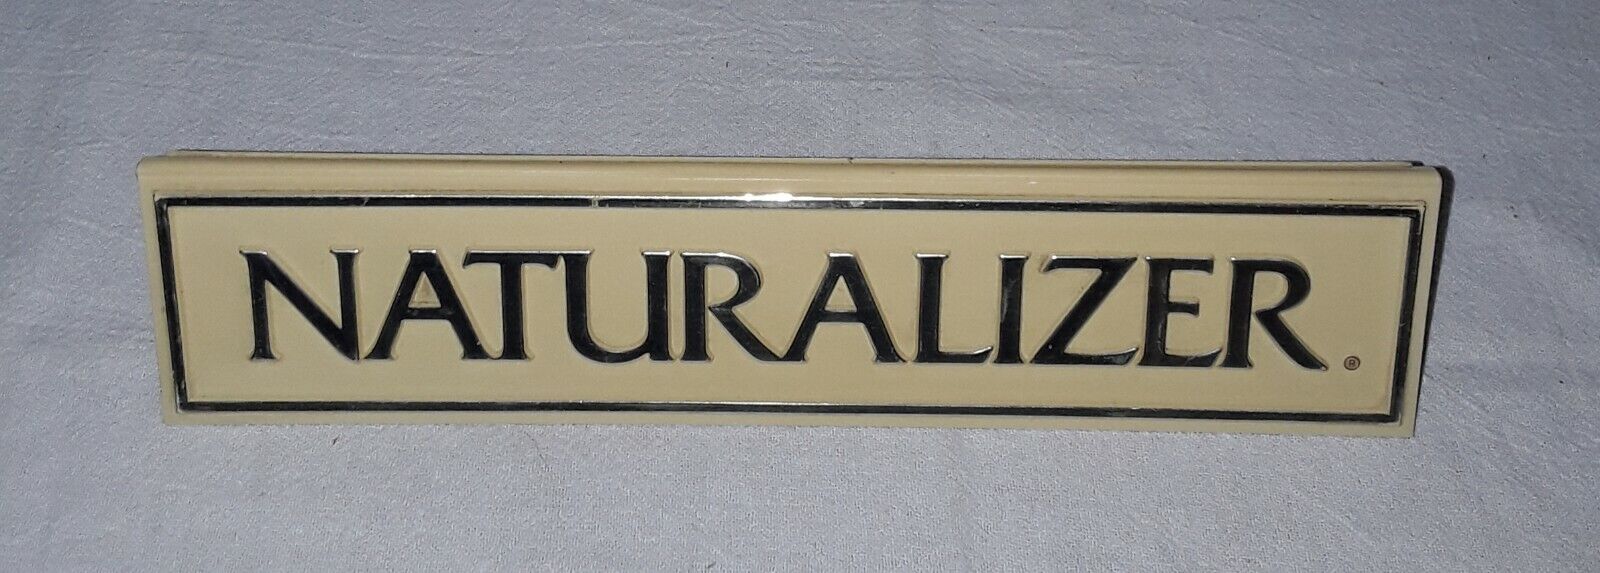 NATURALIZER SHOES COUNTERTOP DISPLAY SIGN SHOW N SELL SIGN 